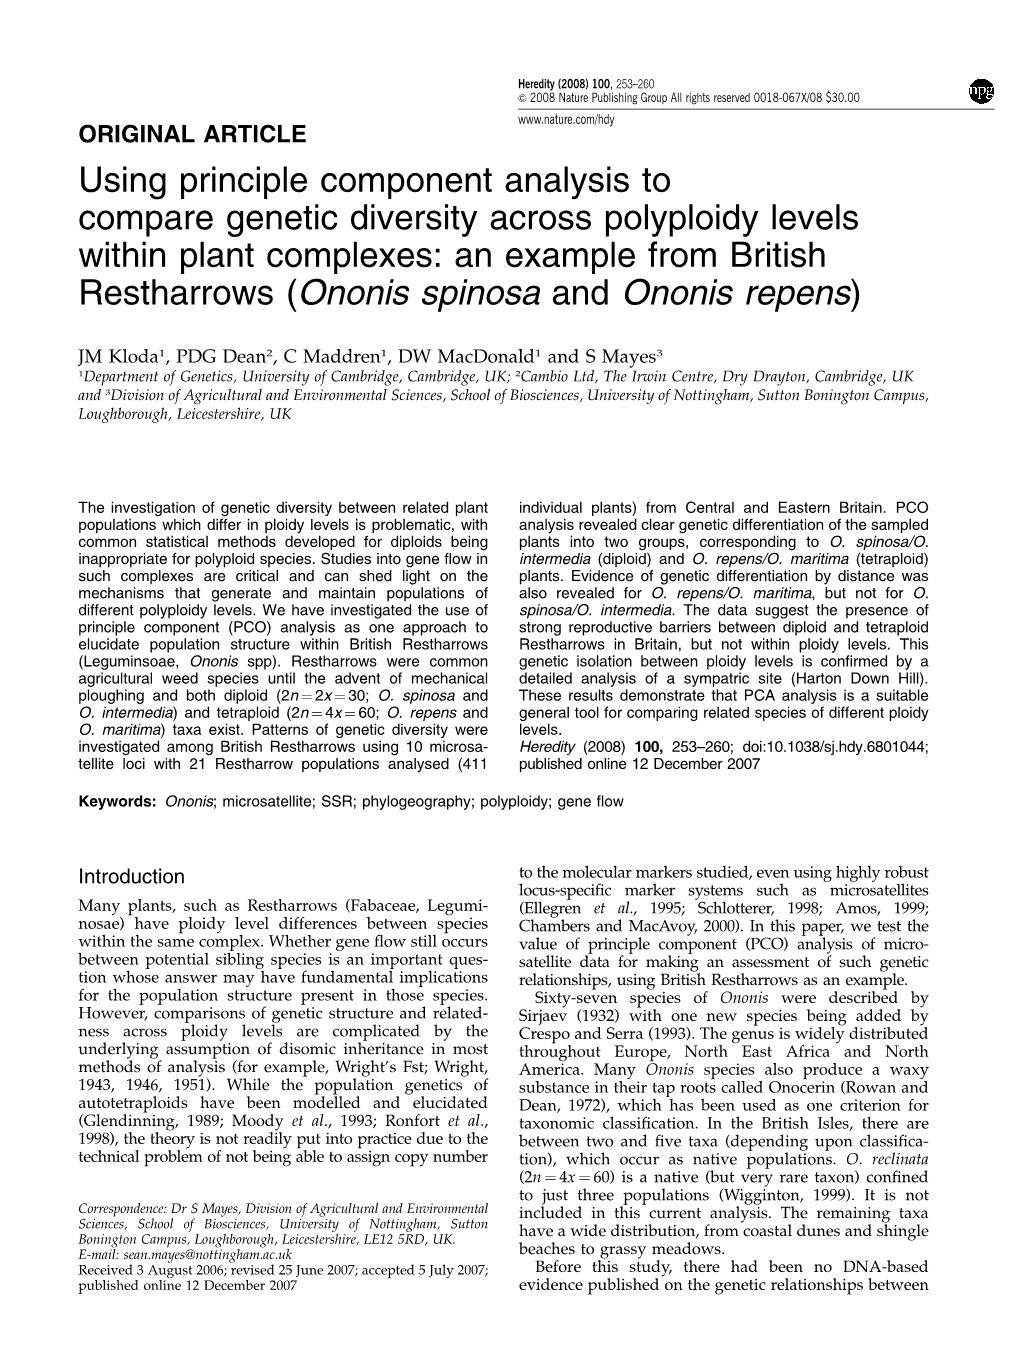 Using Principle Component Analysis to Compare Genetic Diversity